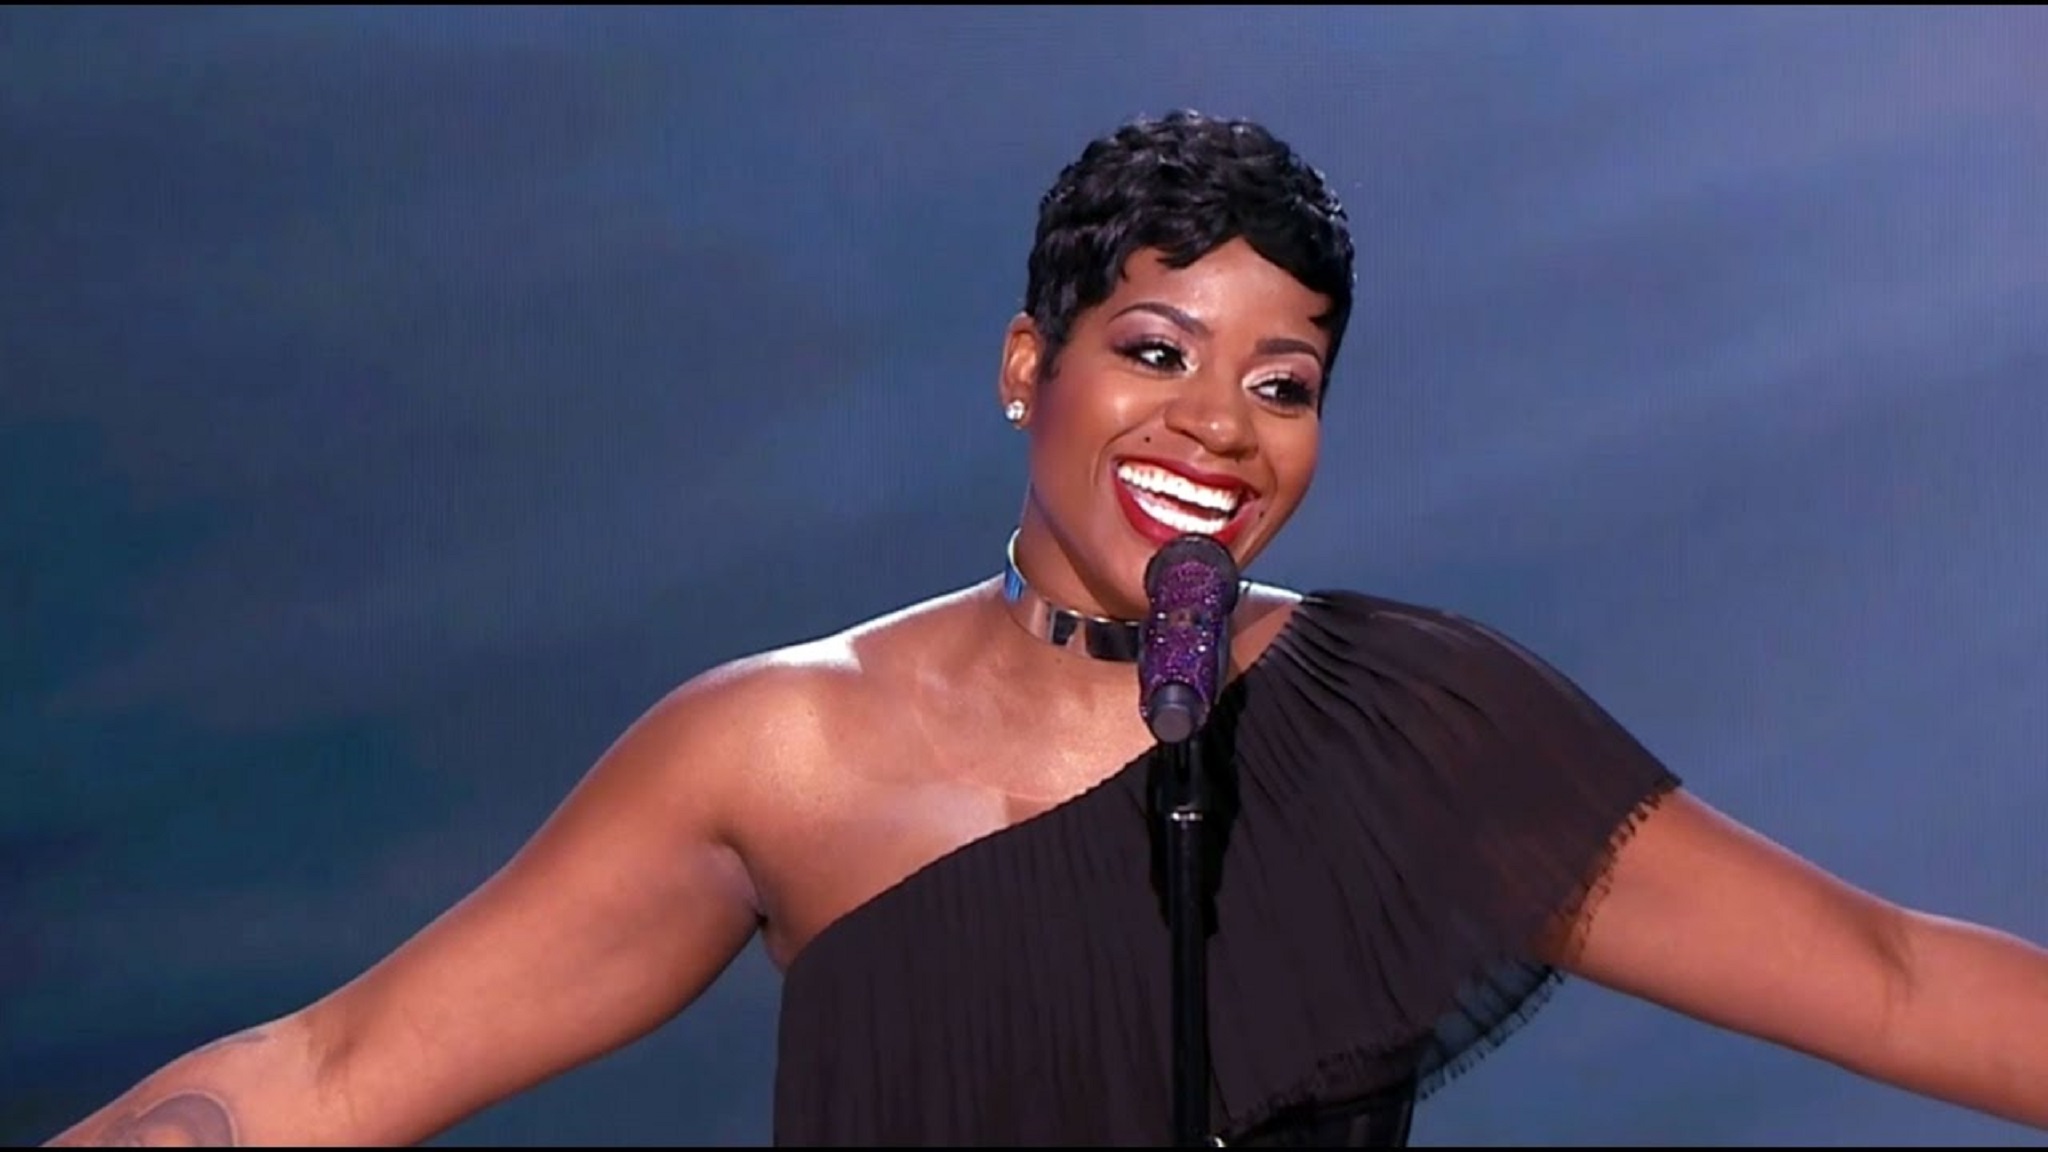 “This Is My Last Tour”, Fantasia Announces She May Be Hitting The Road For The Last Time